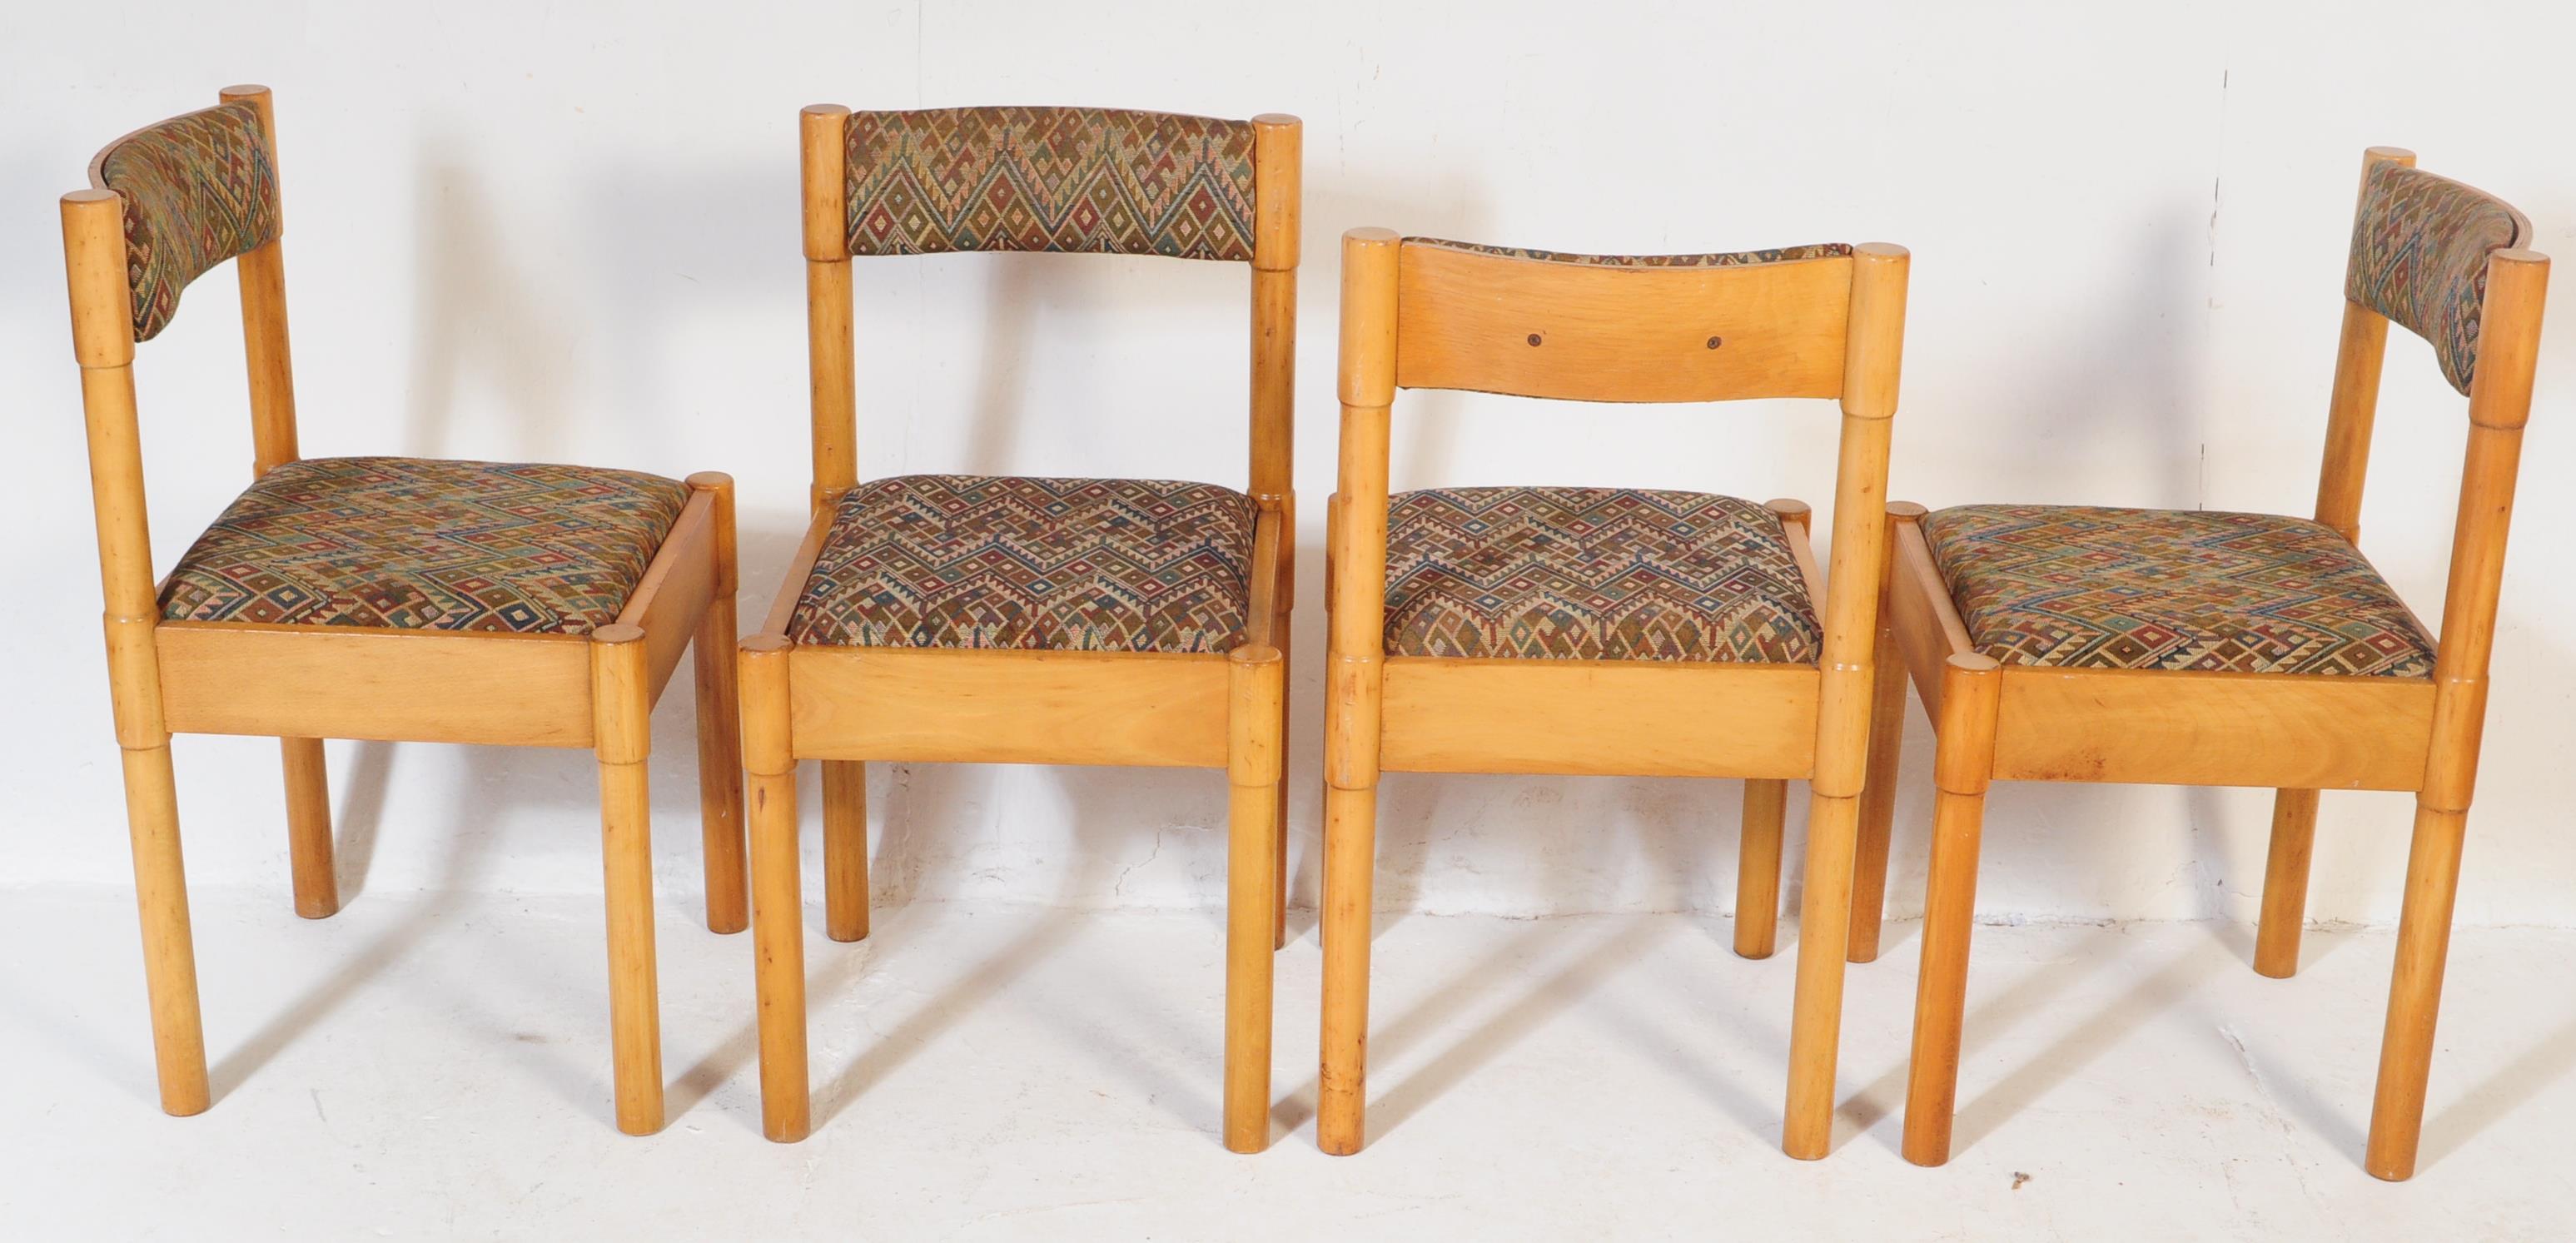 IN THE MANNER OF VICO MAGISTRETTI - FOUR BEECH DINING CHAIRS - Image 4 of 4